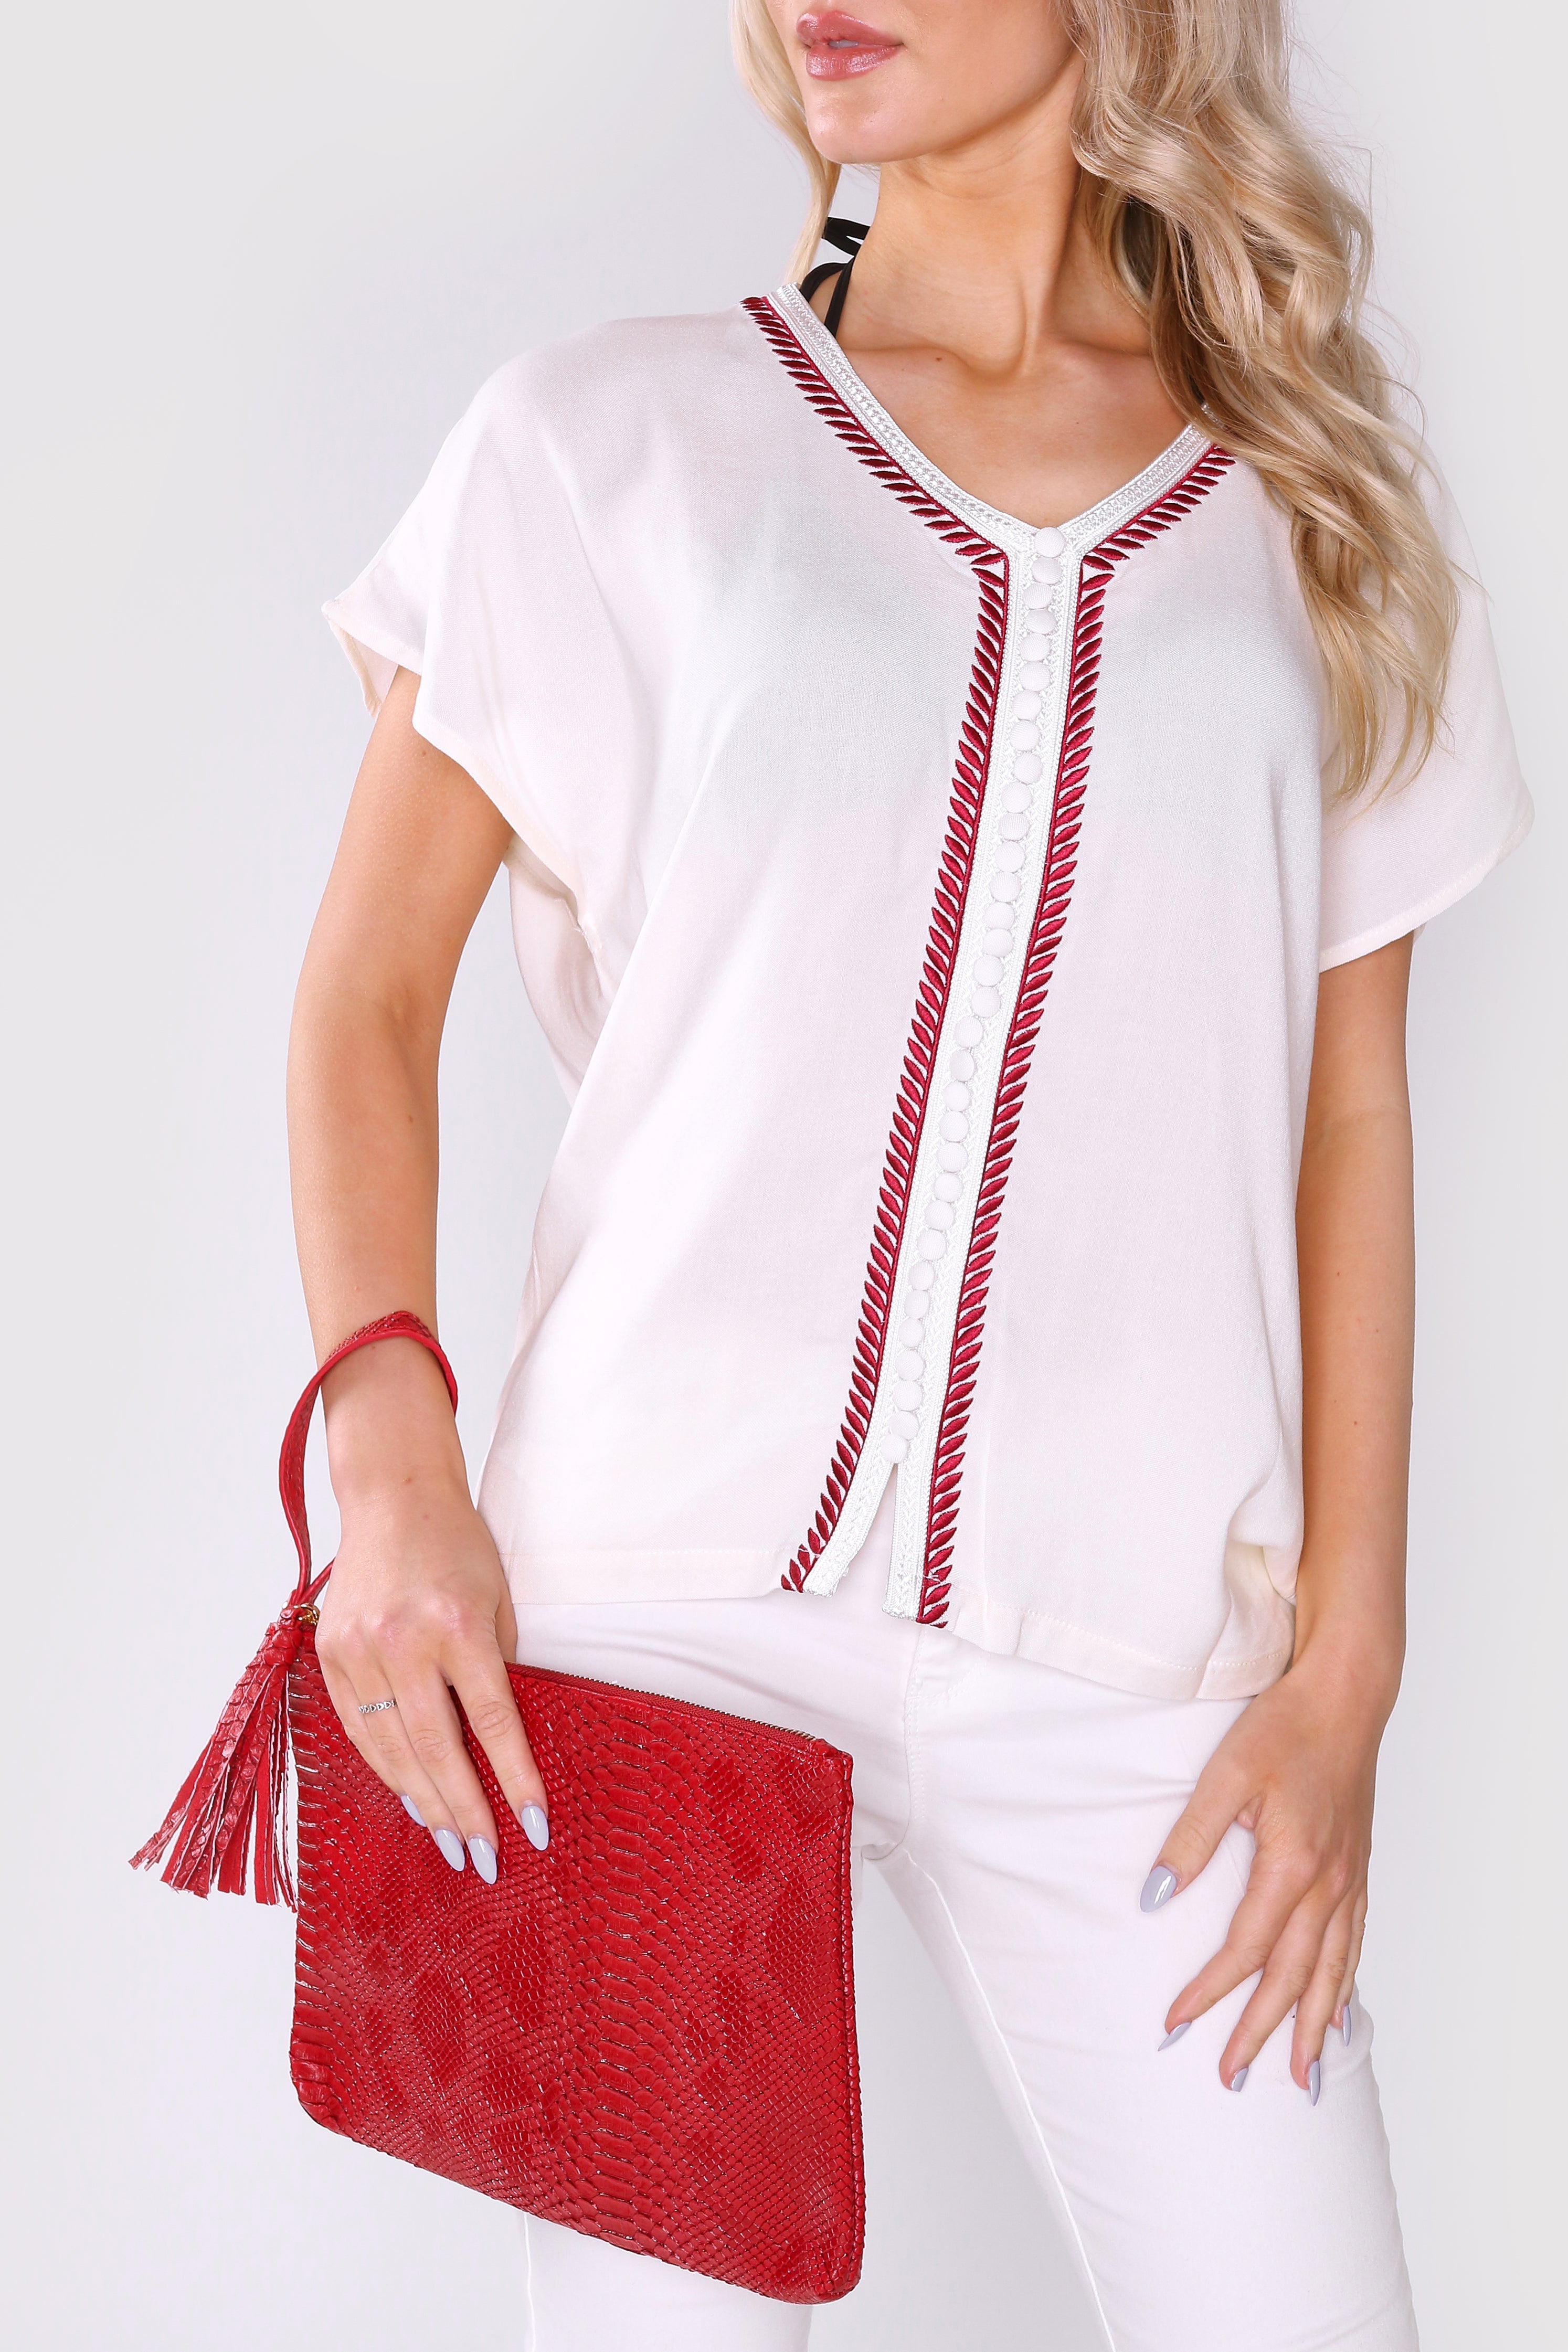 Sabah Short Sleeve Contrast Embroidery Casual V-Neck Tunic Top in White